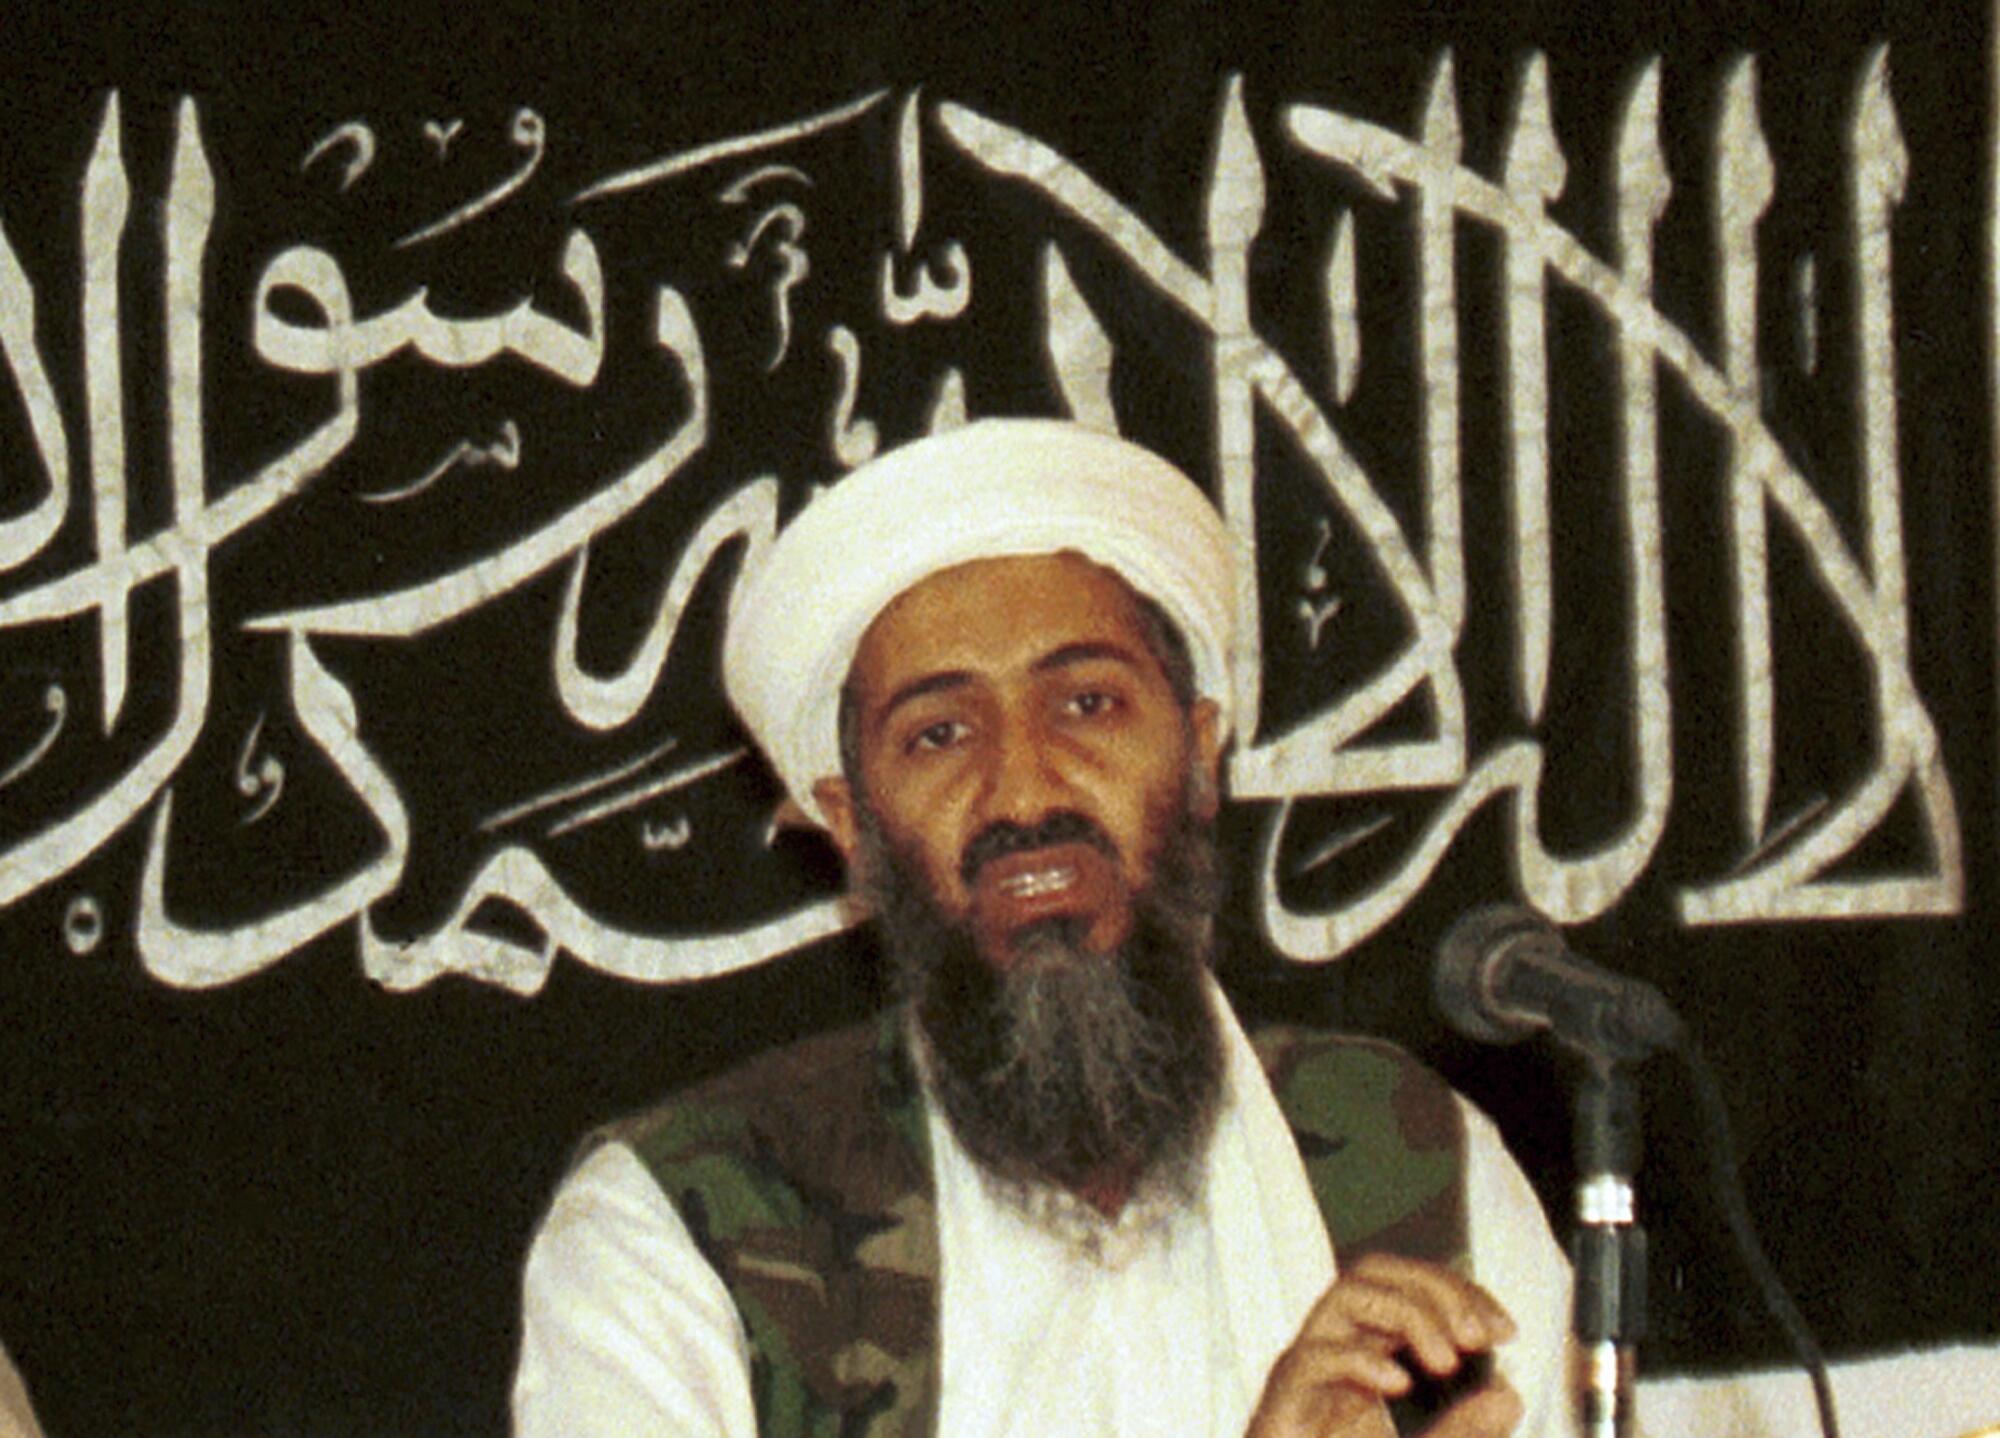 A bearded man in white turban and camouflage vest speaks before a microphone. Behind him is Arabic script on a dark backdrop.